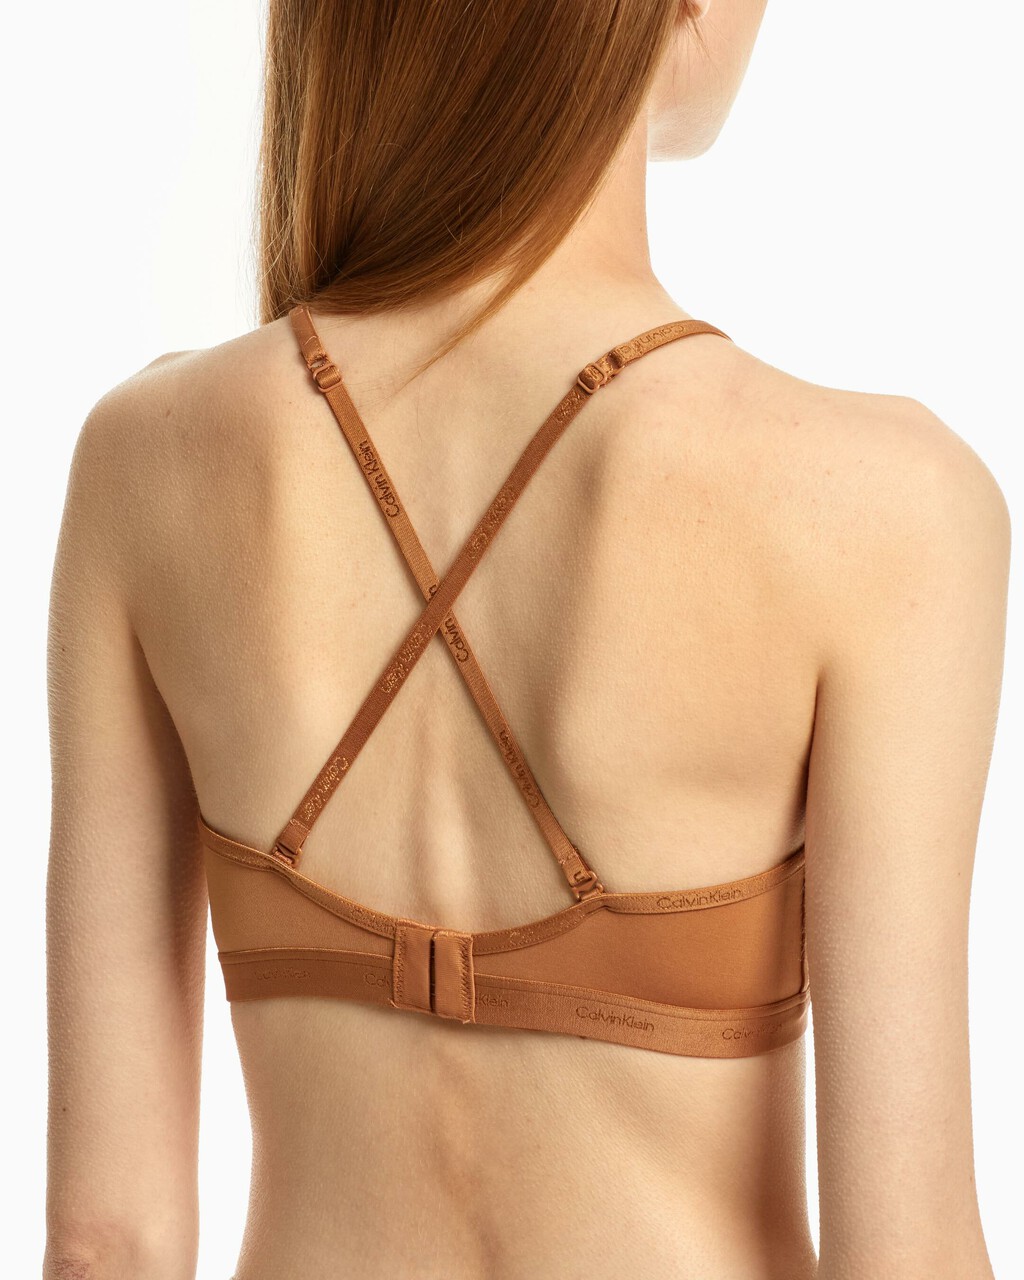 FORM TO BODY NATURAL TRIANGLE BRA, SANDALWOOD, hi-res